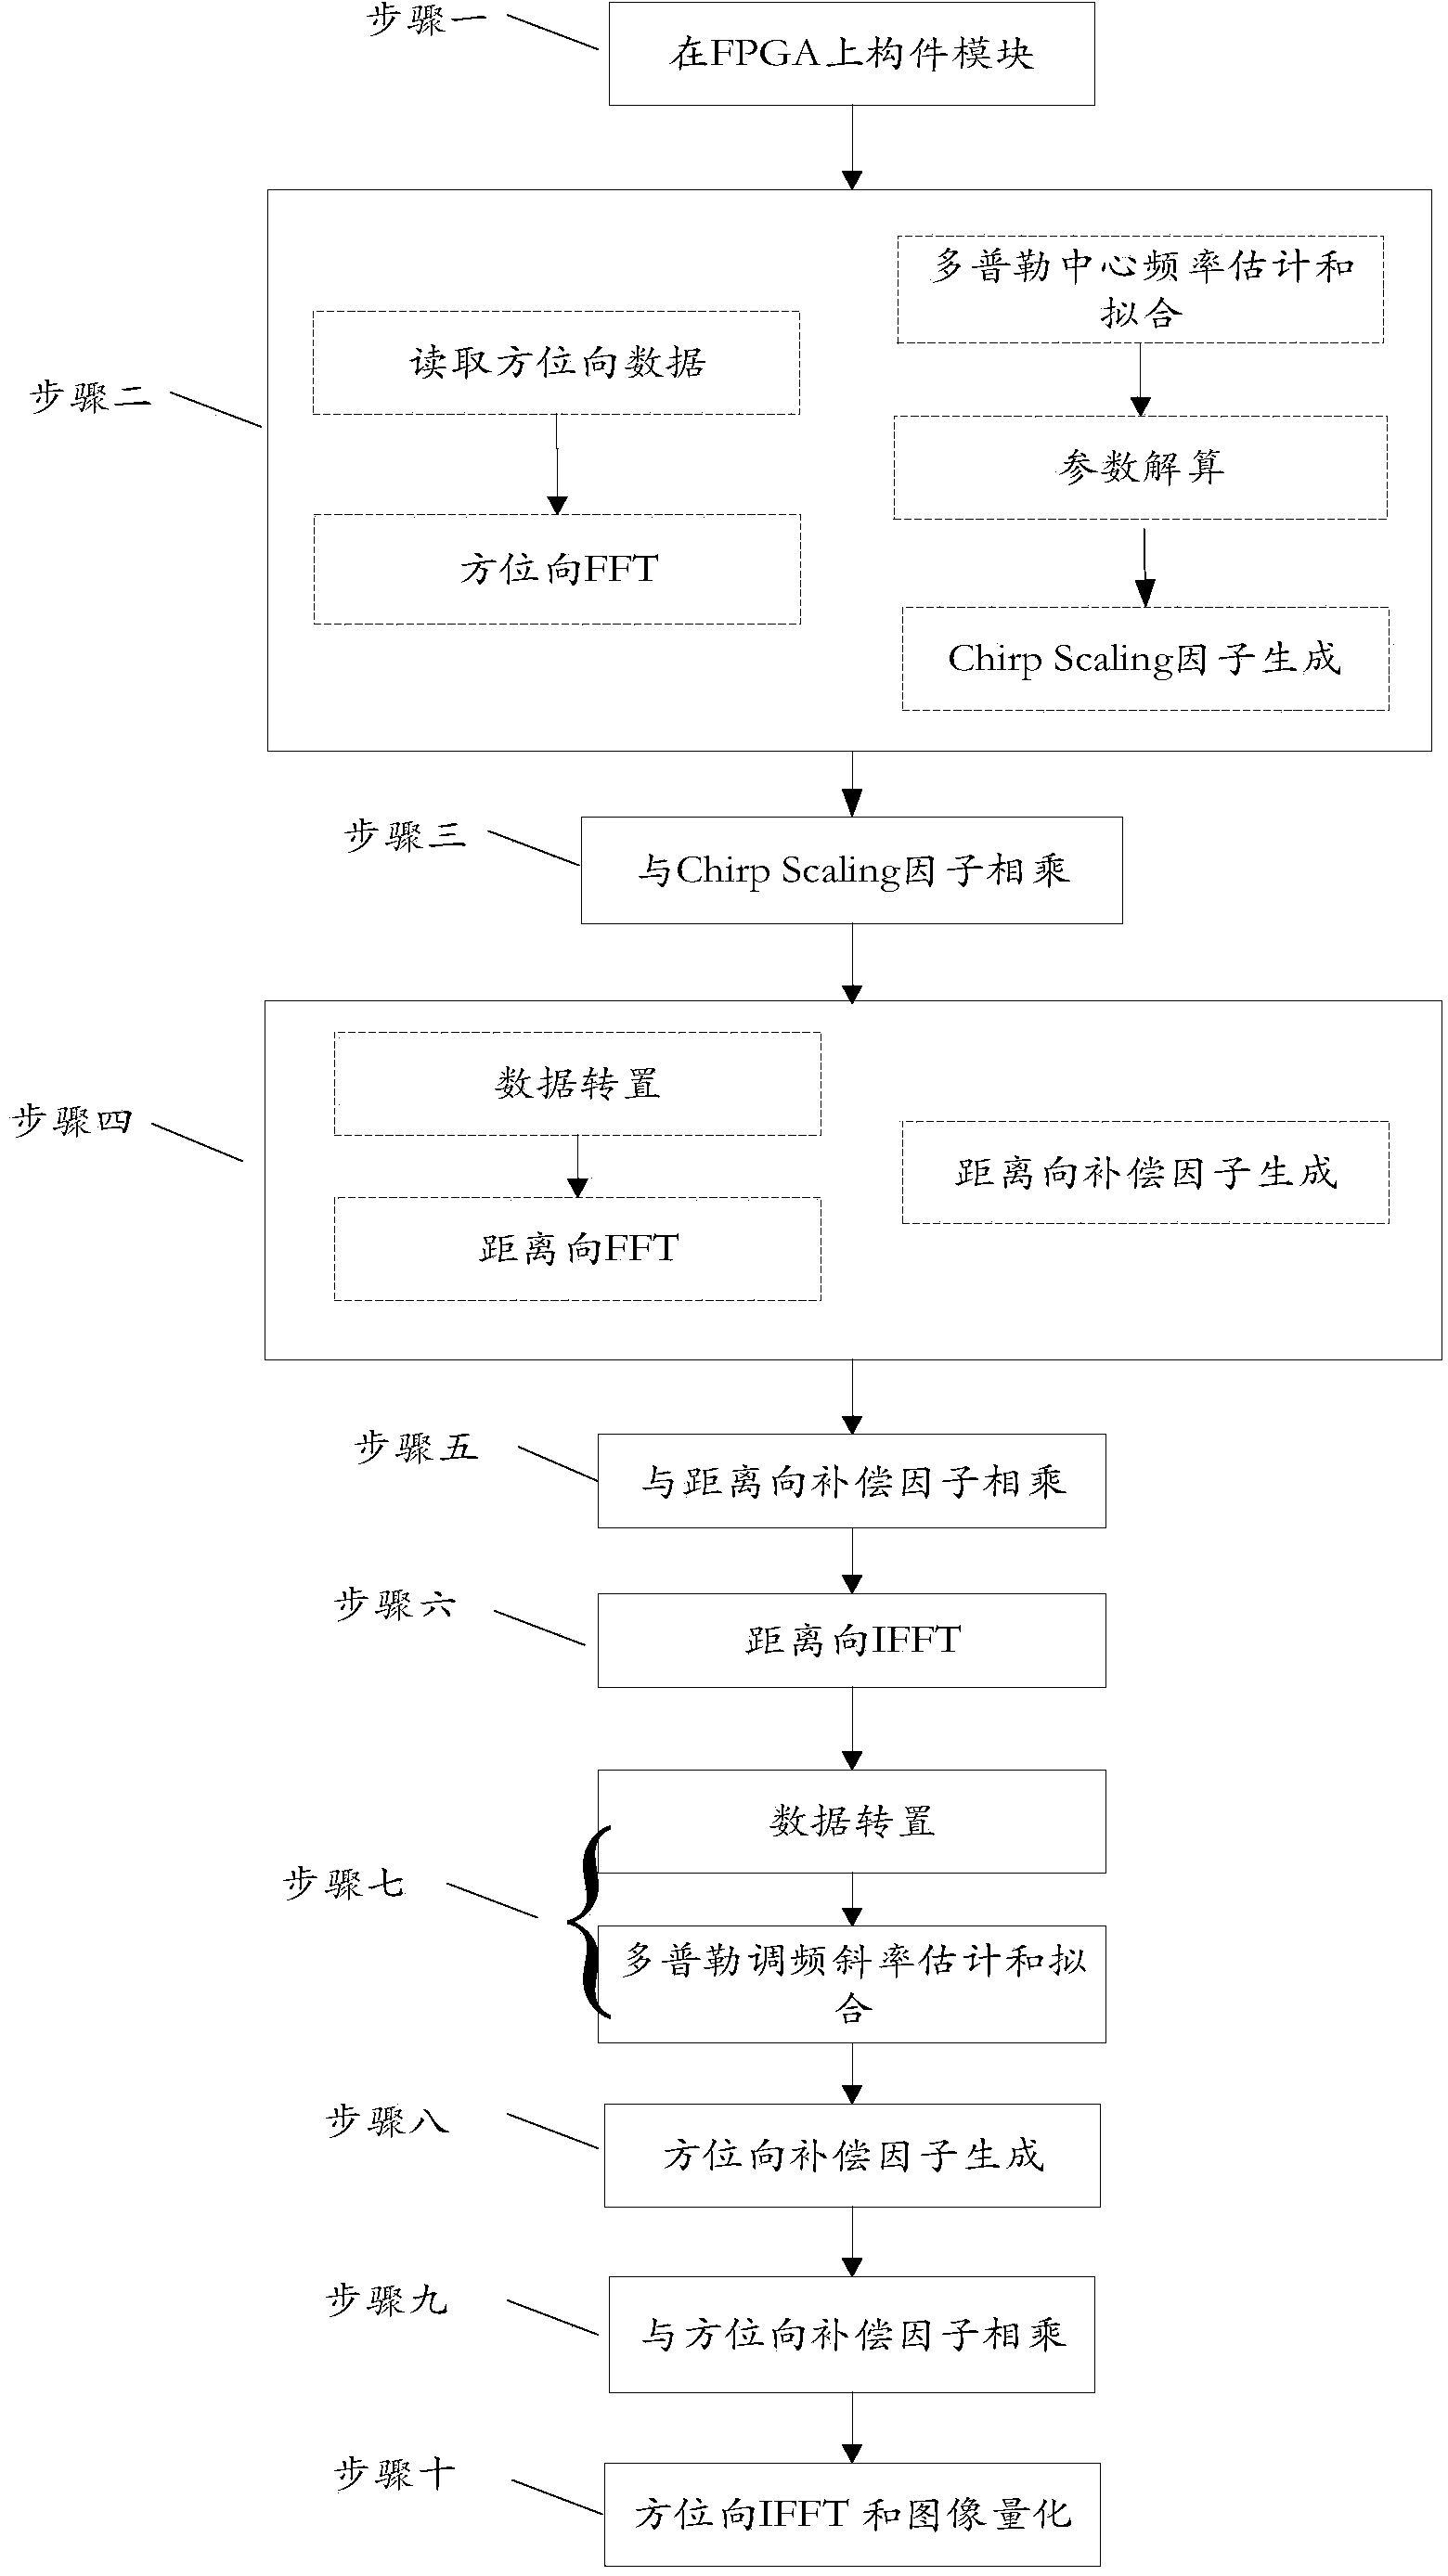 Monolithic FPGA (field programmable gate array) based Chirp Scaling imaging method